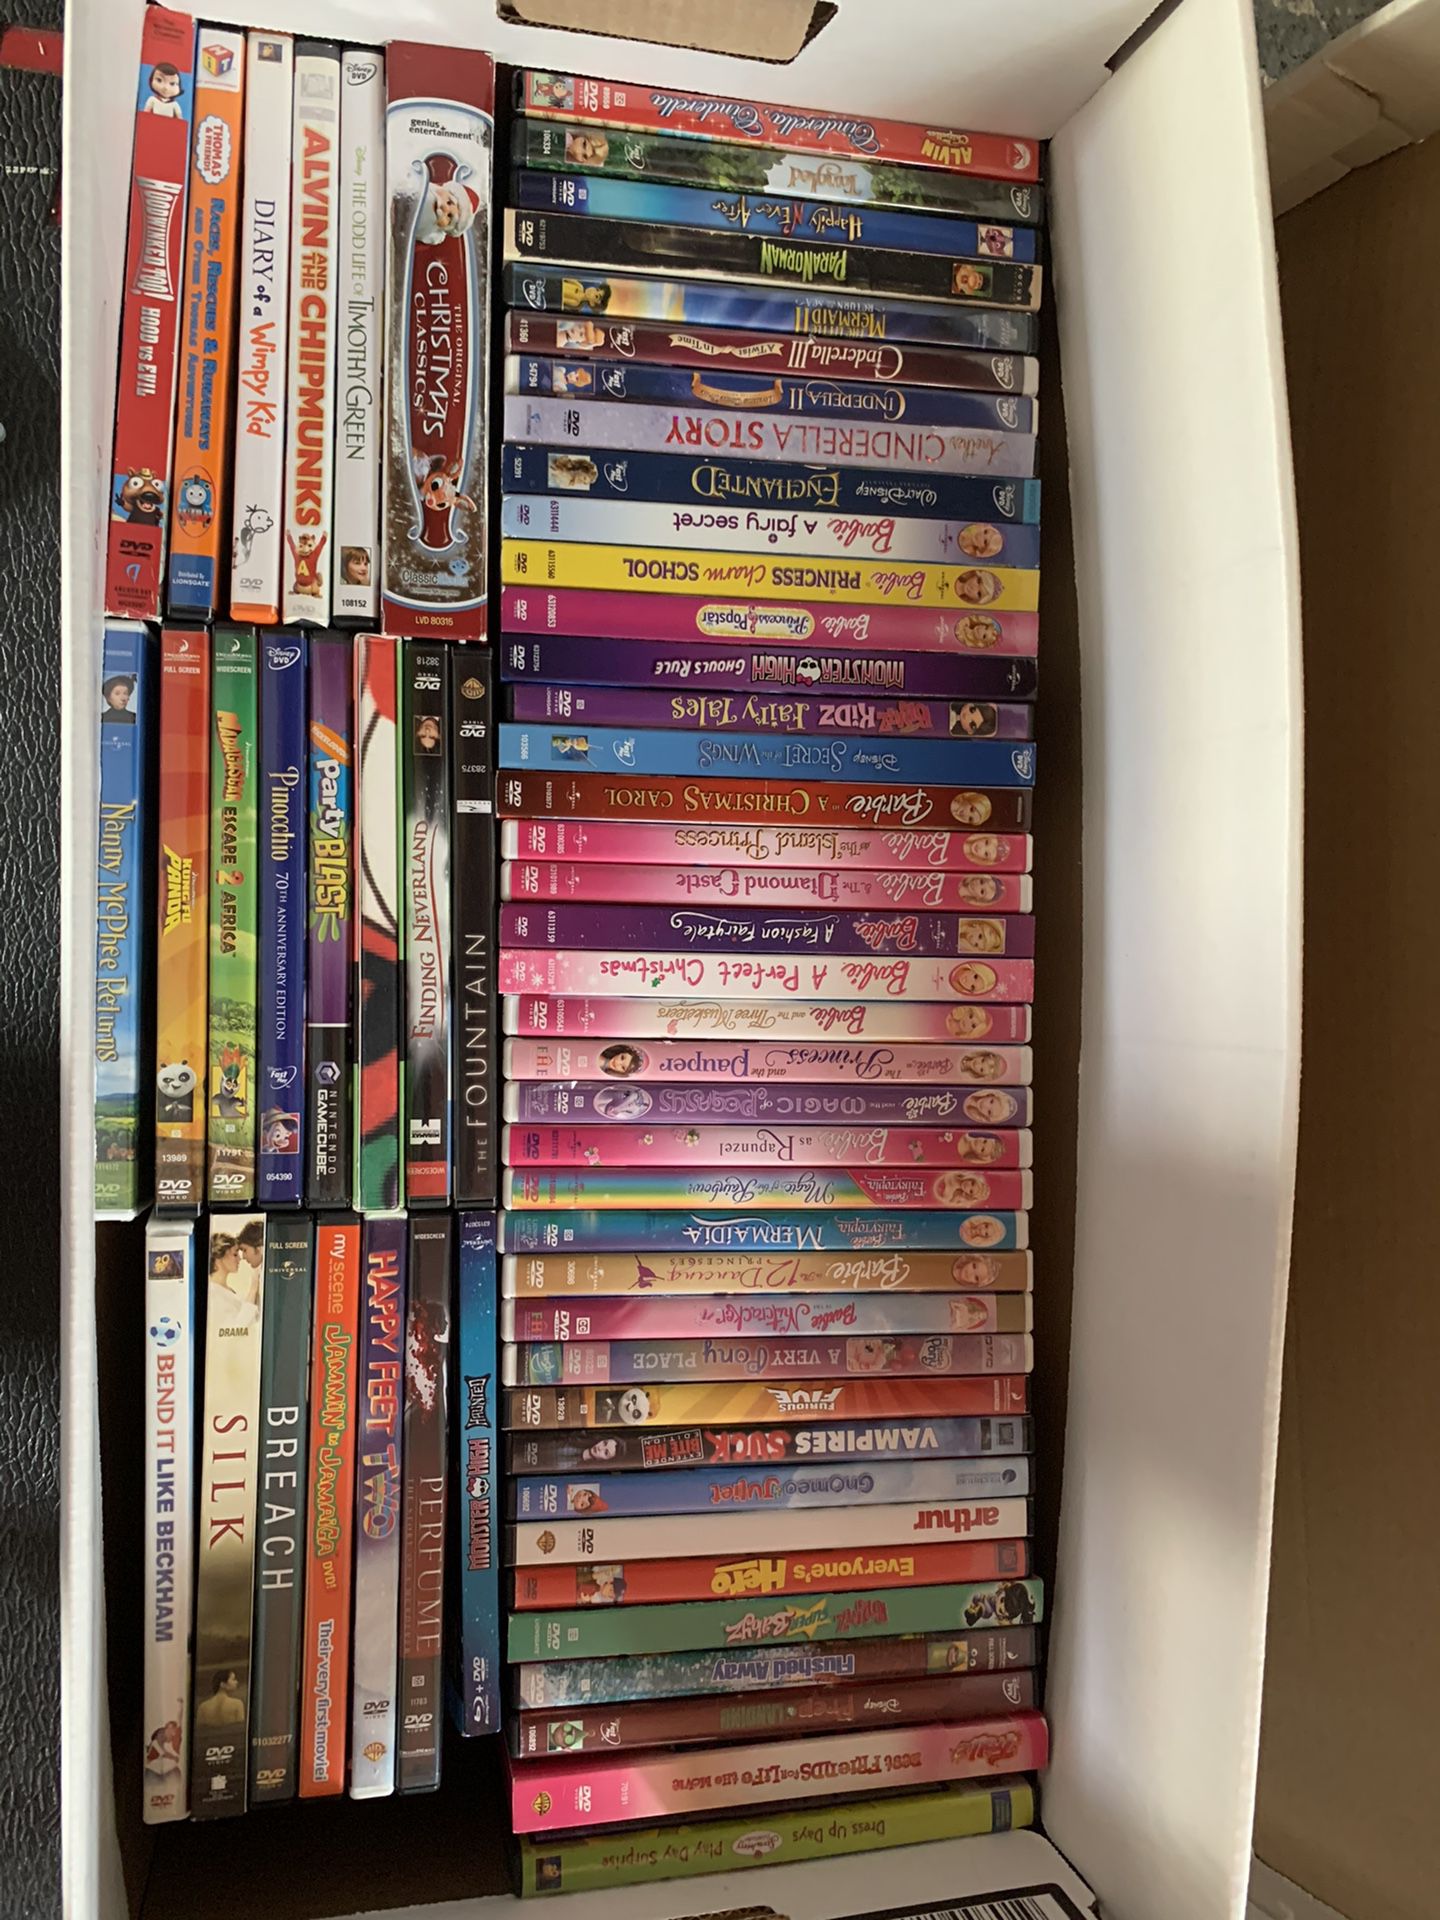 73 count DVD Movies